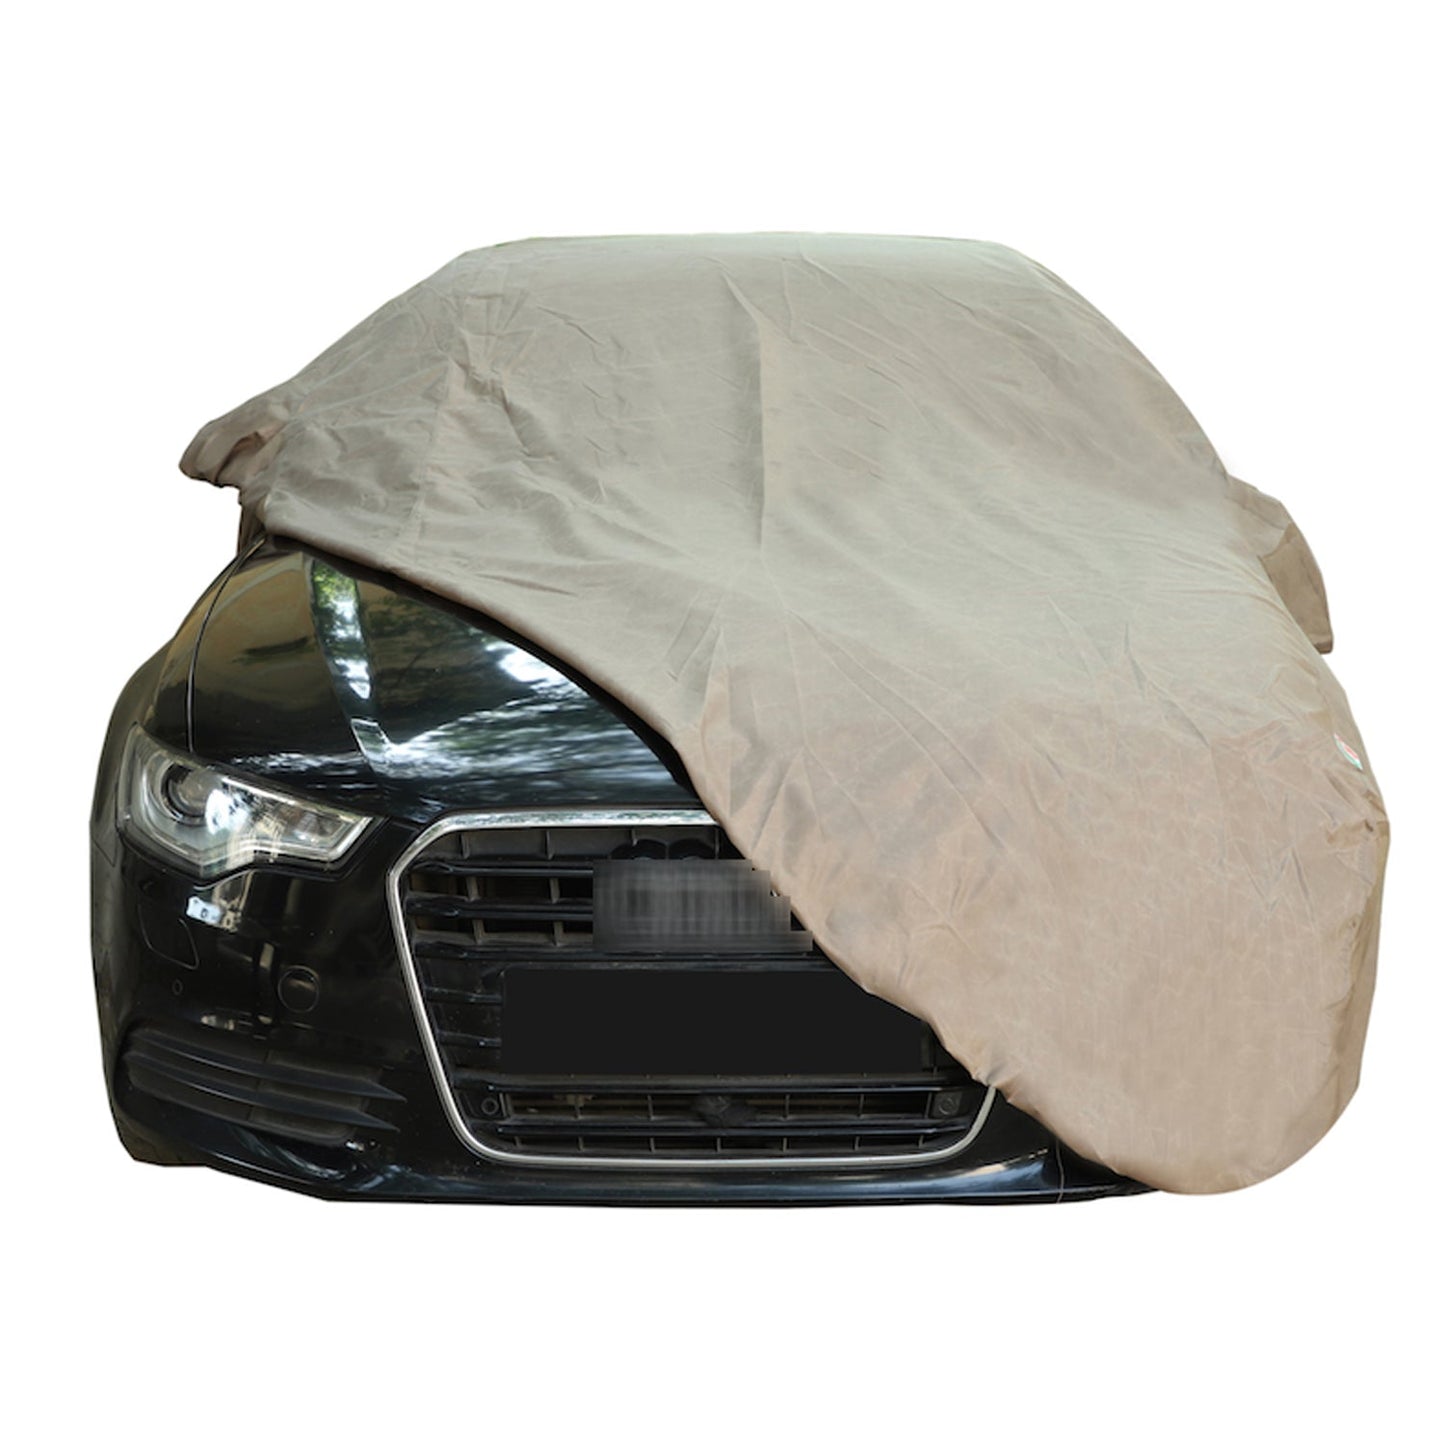 Oshotto Brown 100% Waterproof Car Body Cover with Mirror Pockets For Tata Indica